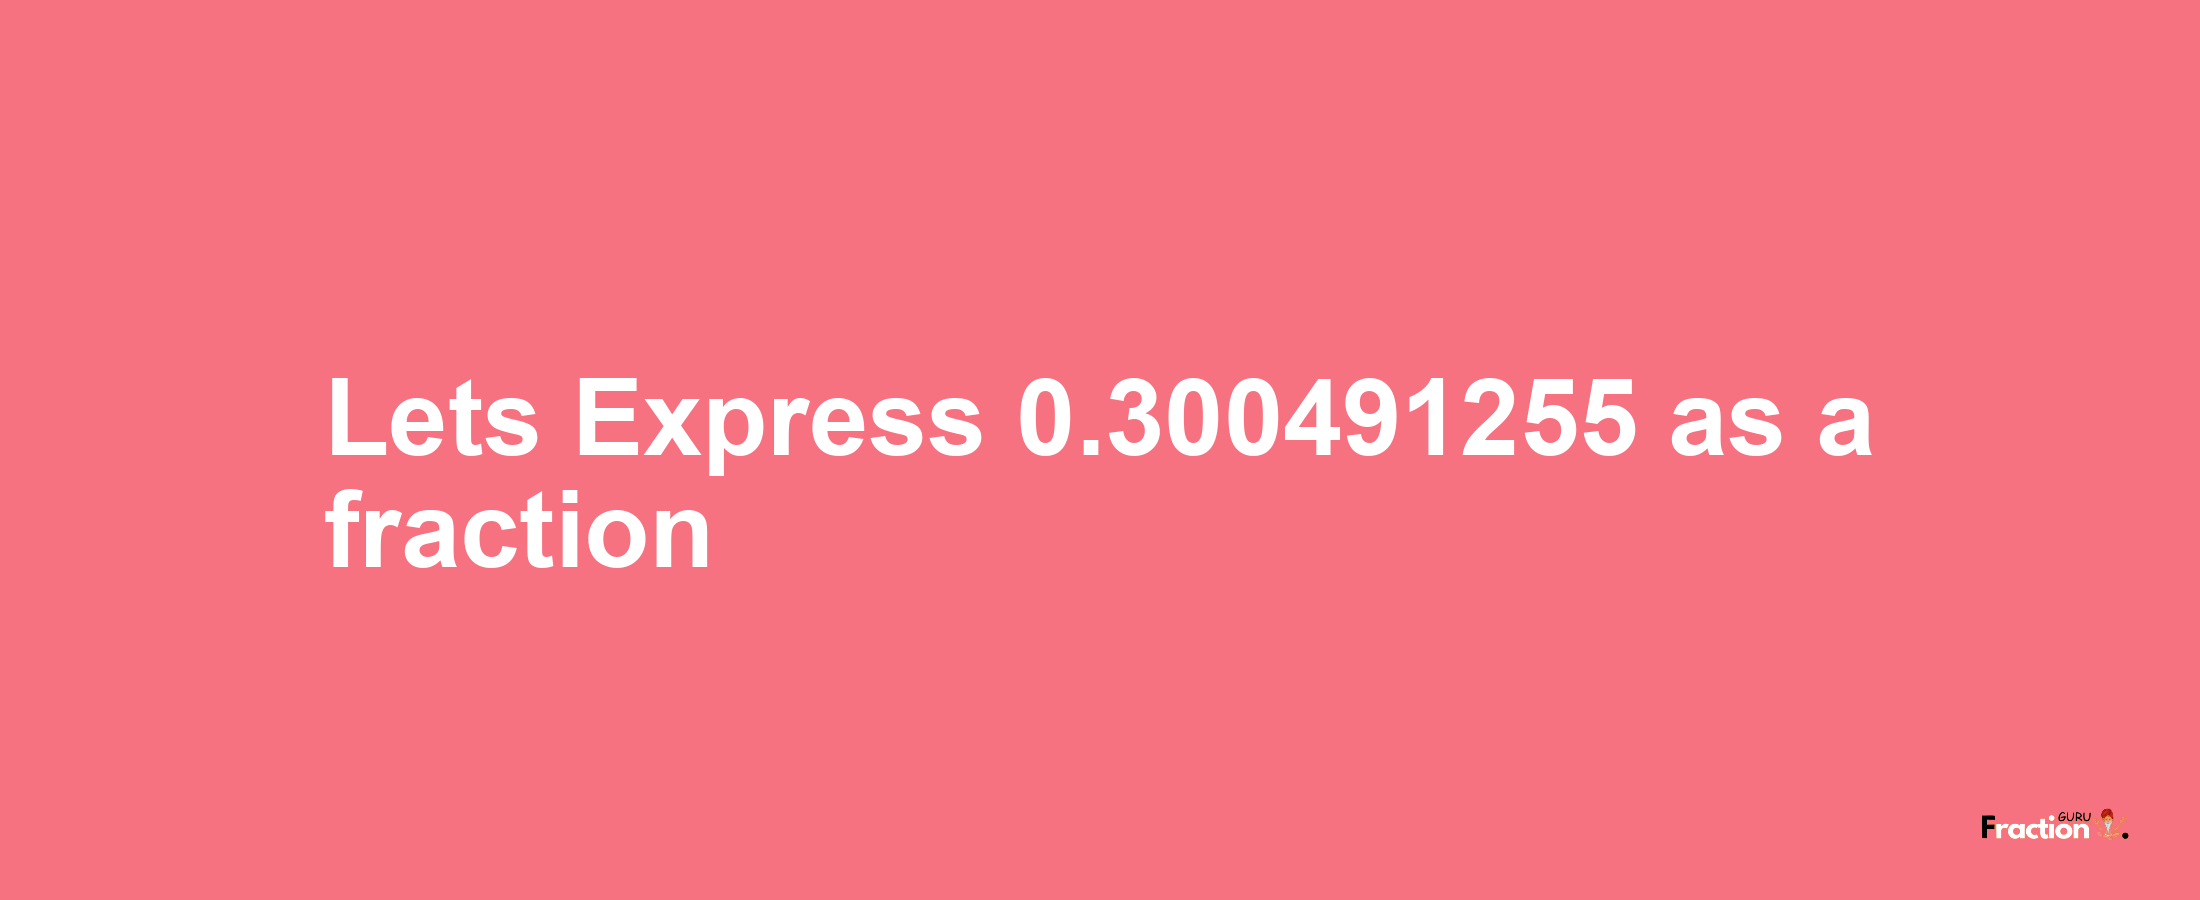 Lets Express 0.300491255 as afraction